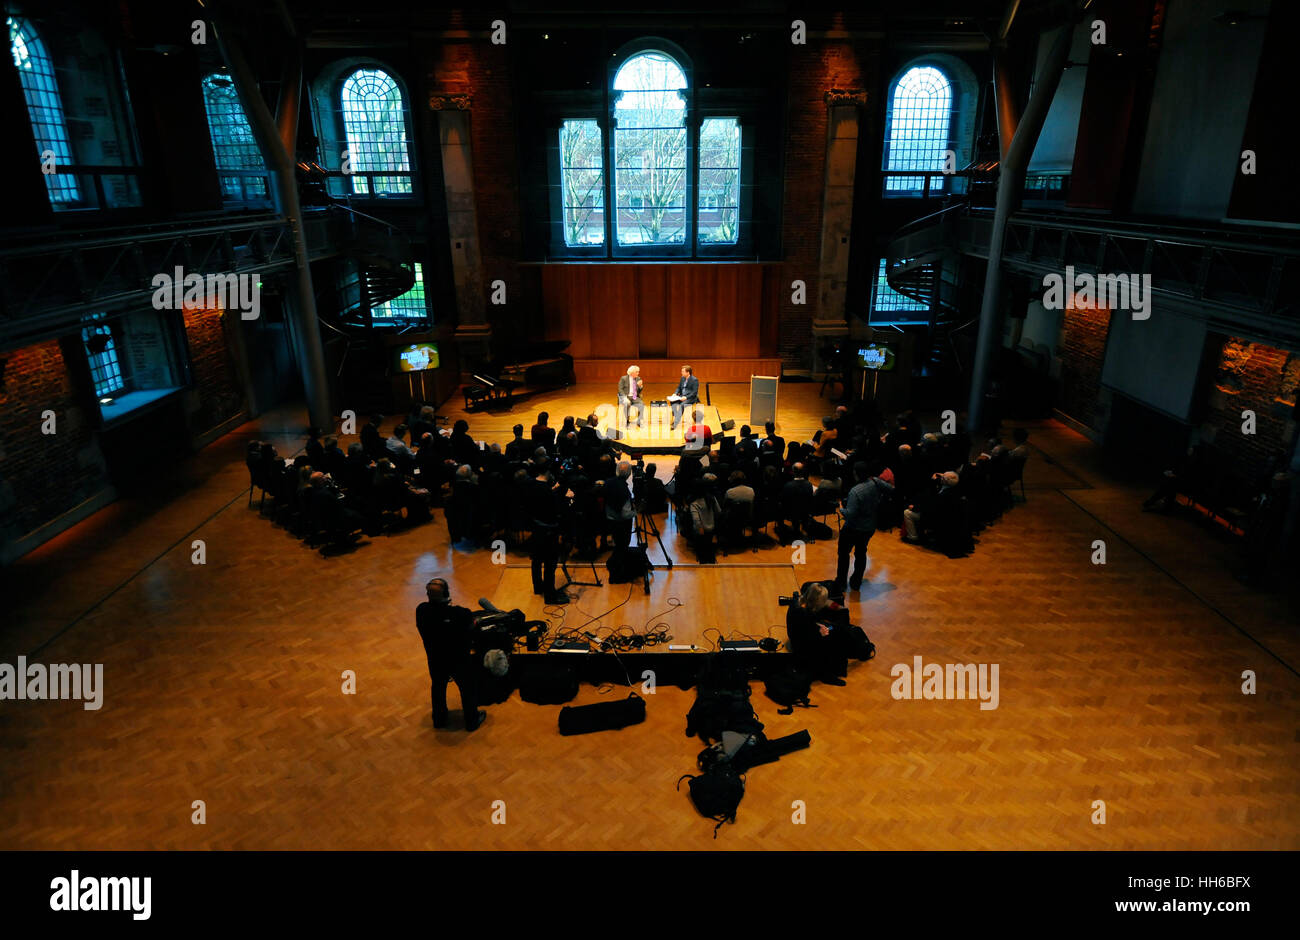 Sir Simon Rattle unveils his future plans for the London Symphony Orchestra at LSO, St Luke's in London. Stock Photo